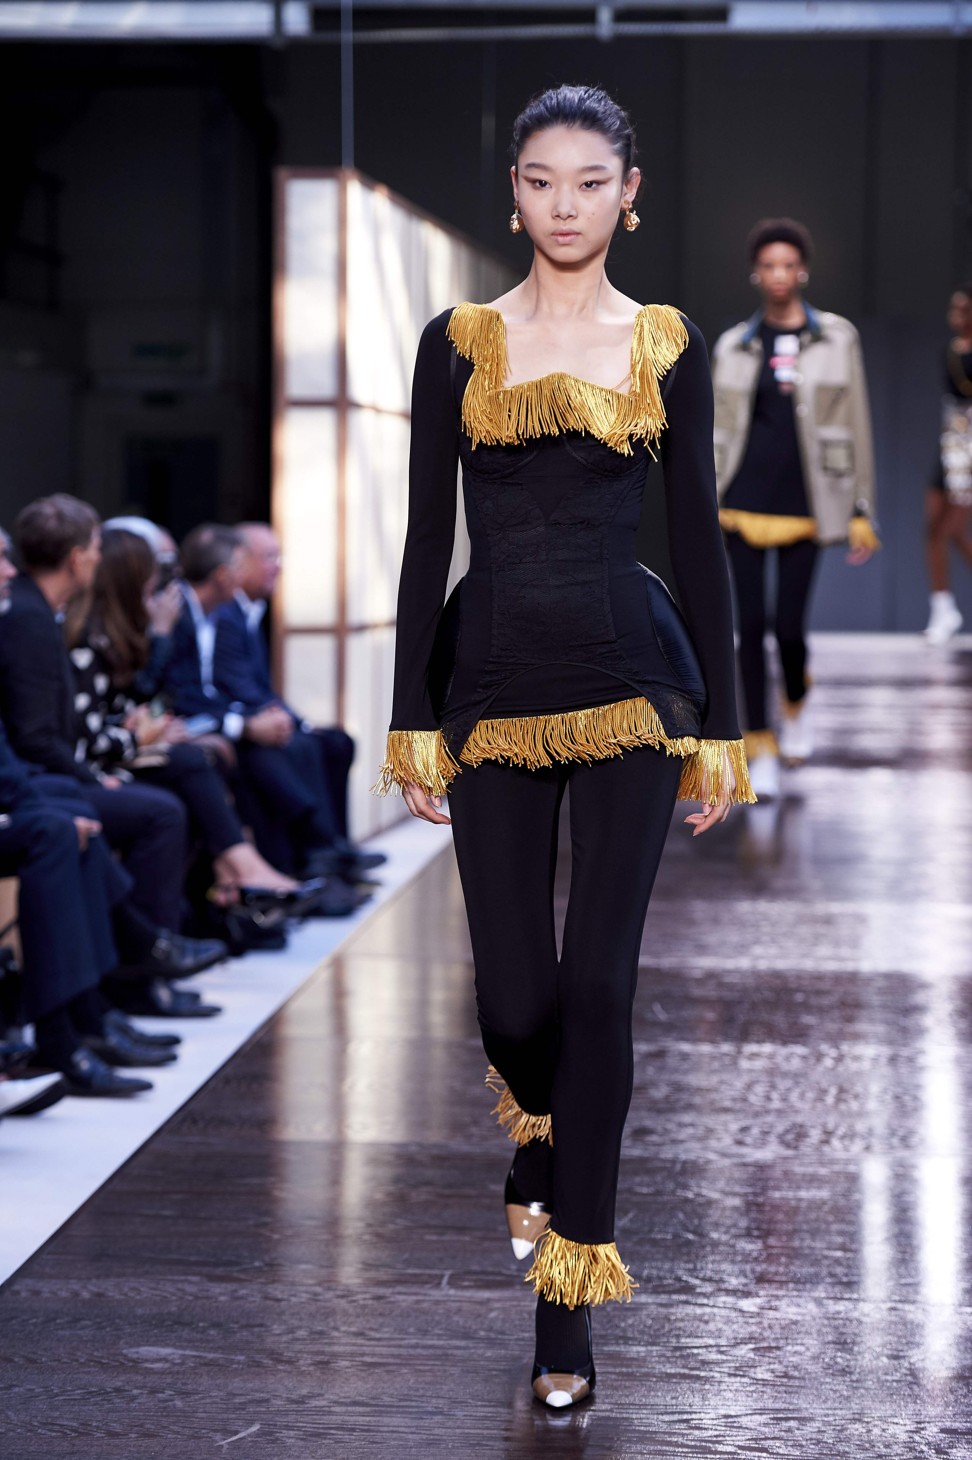 A model presents an eye-catching black outfit with edges decorated with gold tassels from Burberry’s spring-summer 2019 collection at London Fashion Week. Photo: AFPl